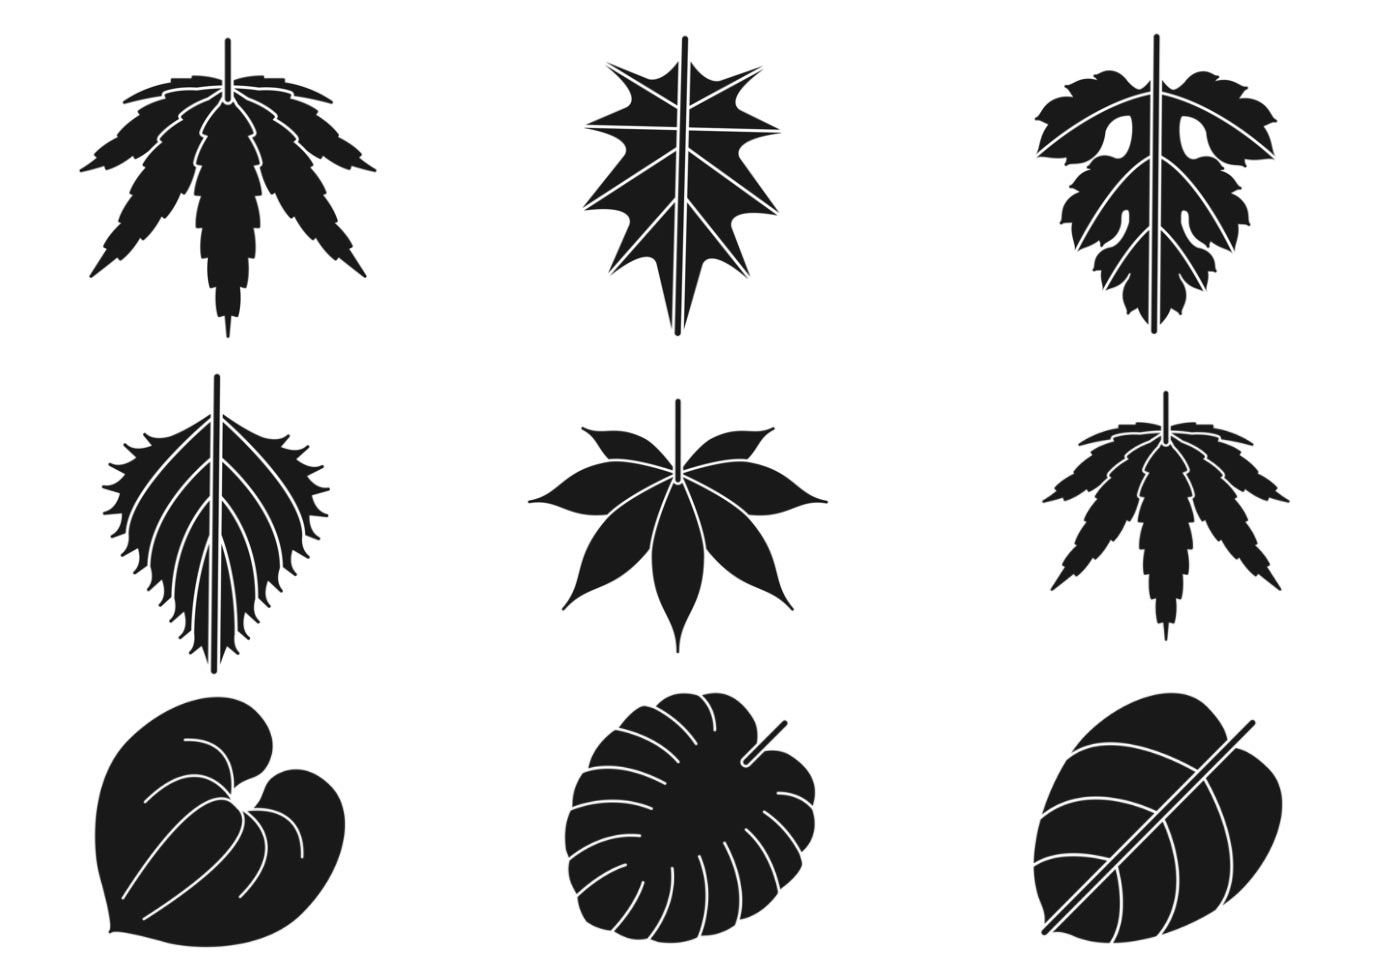 Download Leaves Silhouette Vector Pack - Download Free Vectors, Clipart Graphics & Vector Art